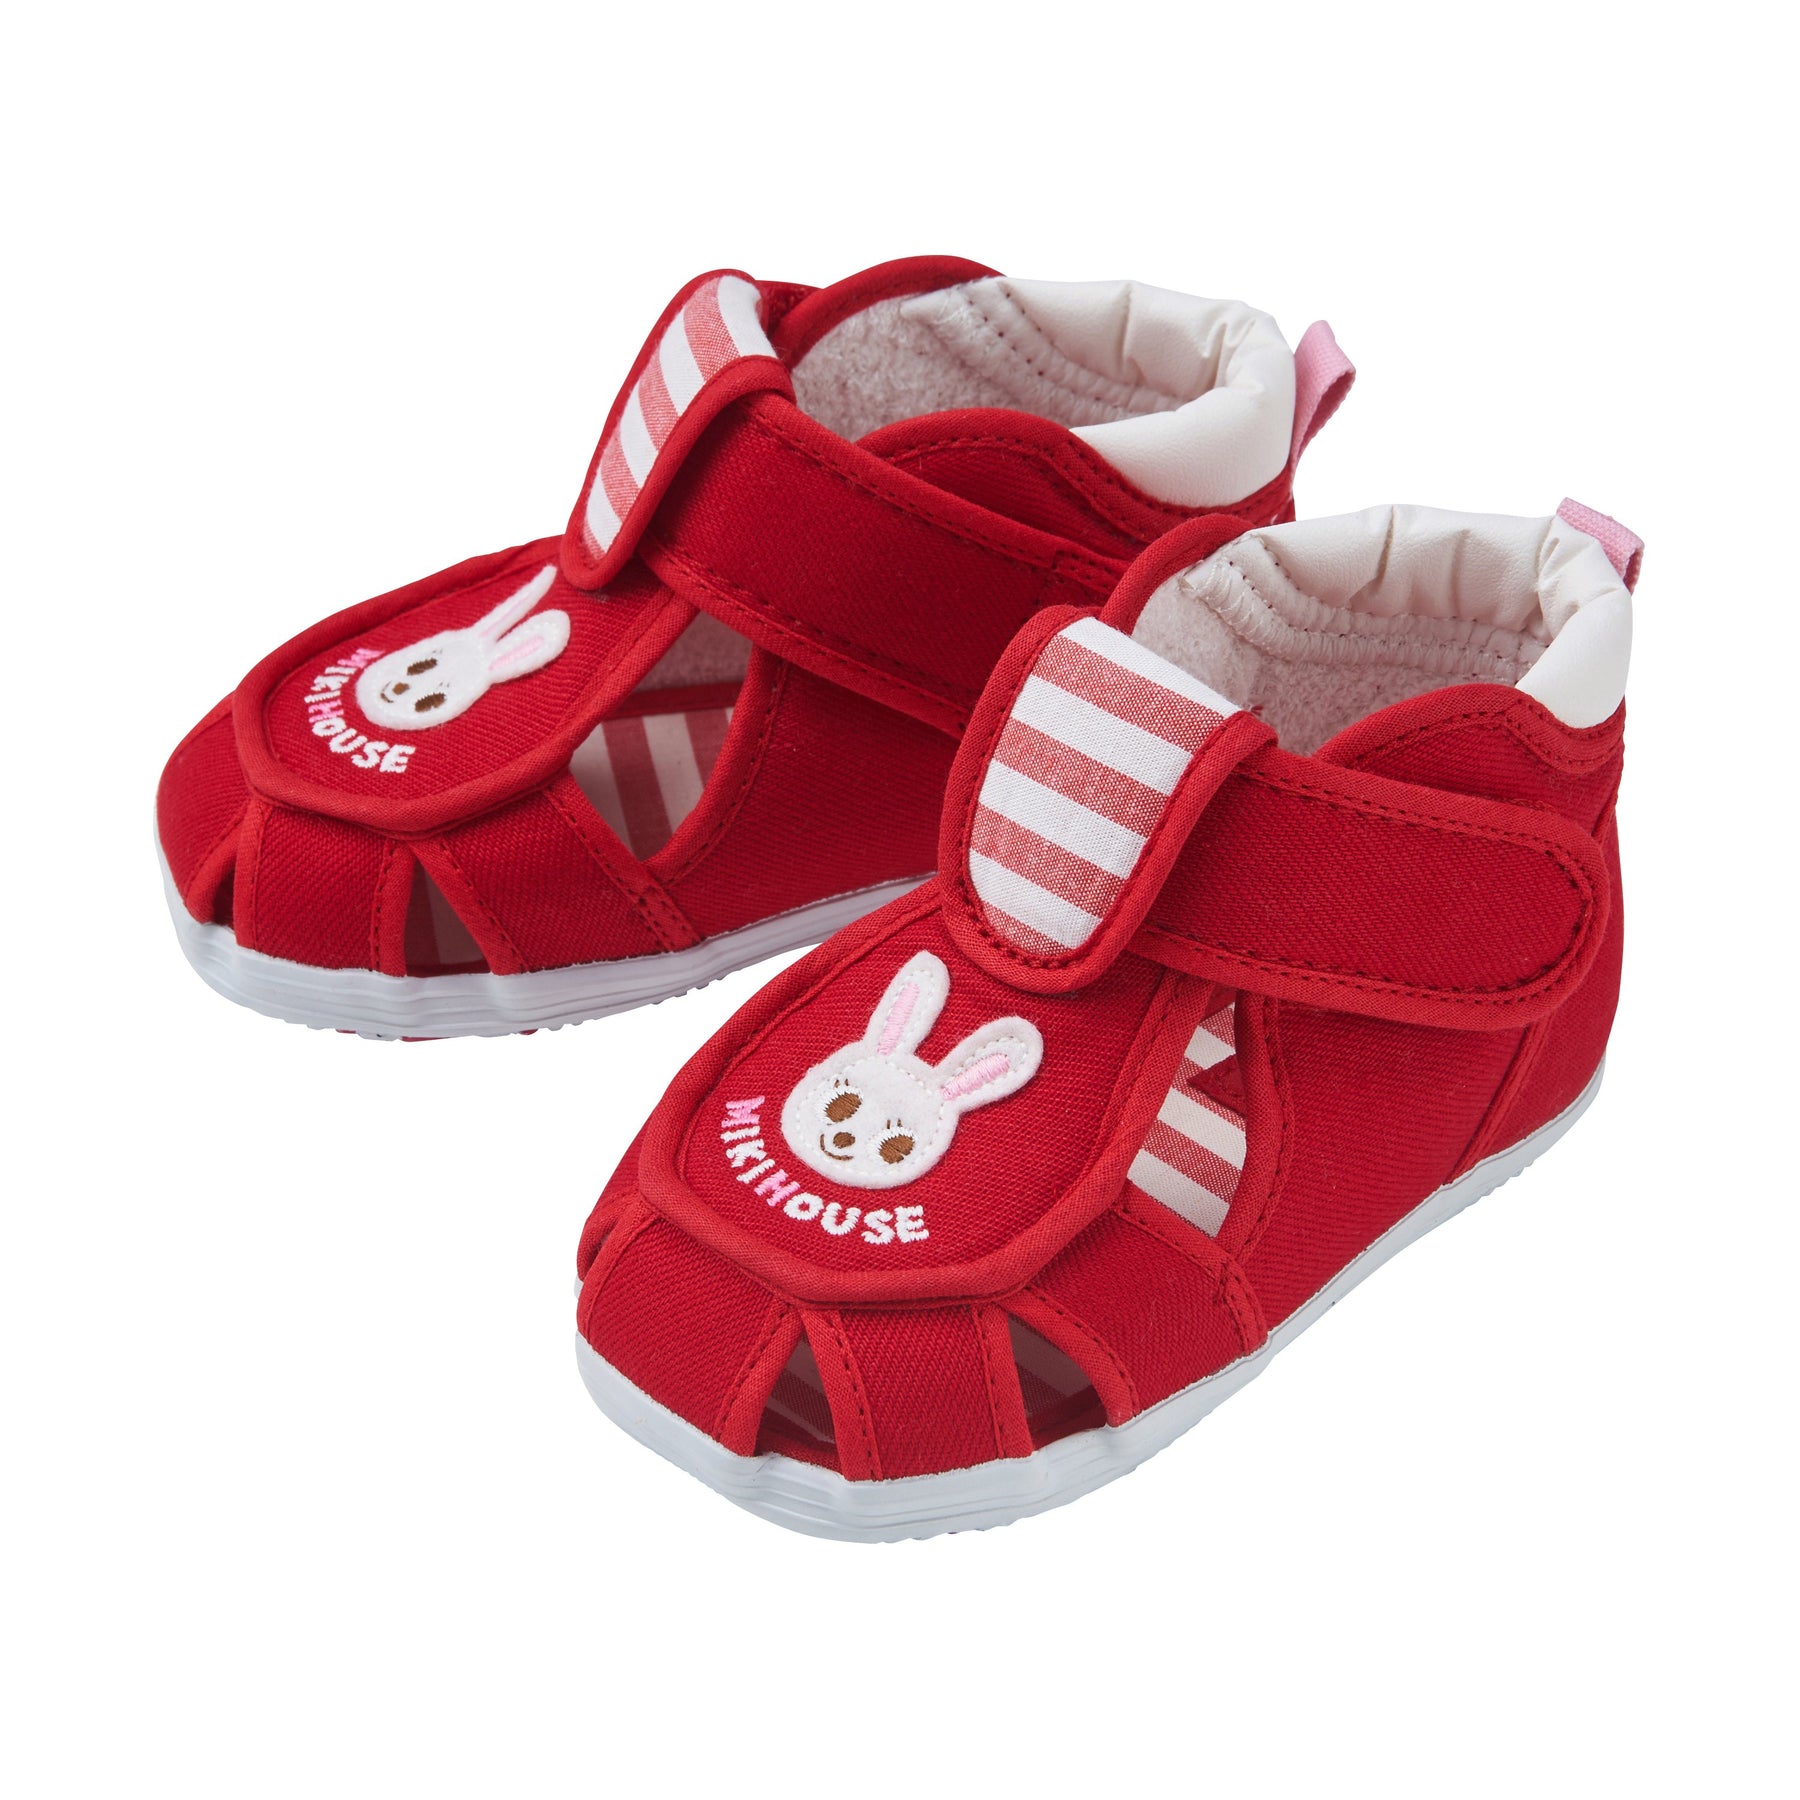 Miki House Baby Sandals | MIKIHOUSE CANADA KIDS STORE ONLINE